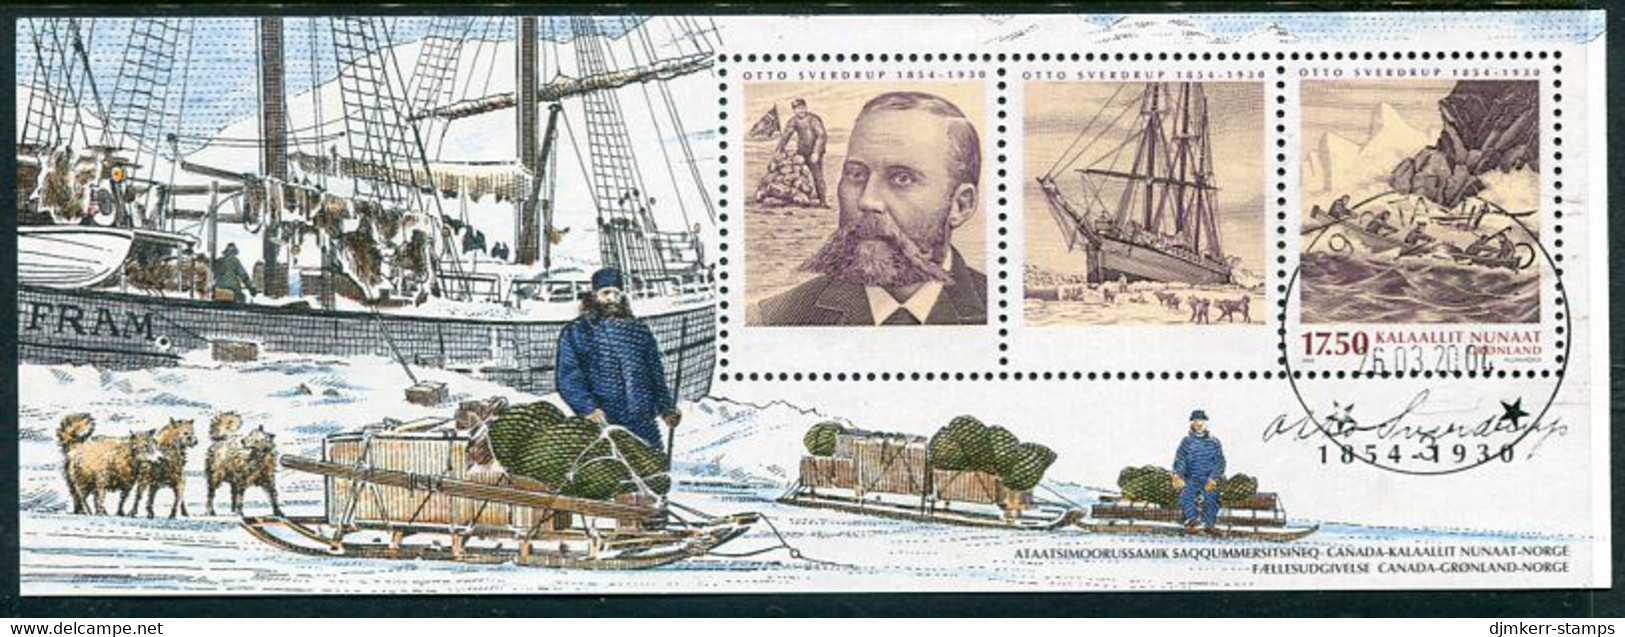 GREENLAND 2004 Otto Sverdrup Block  Used.  Michel Block 27 - Used Stamps